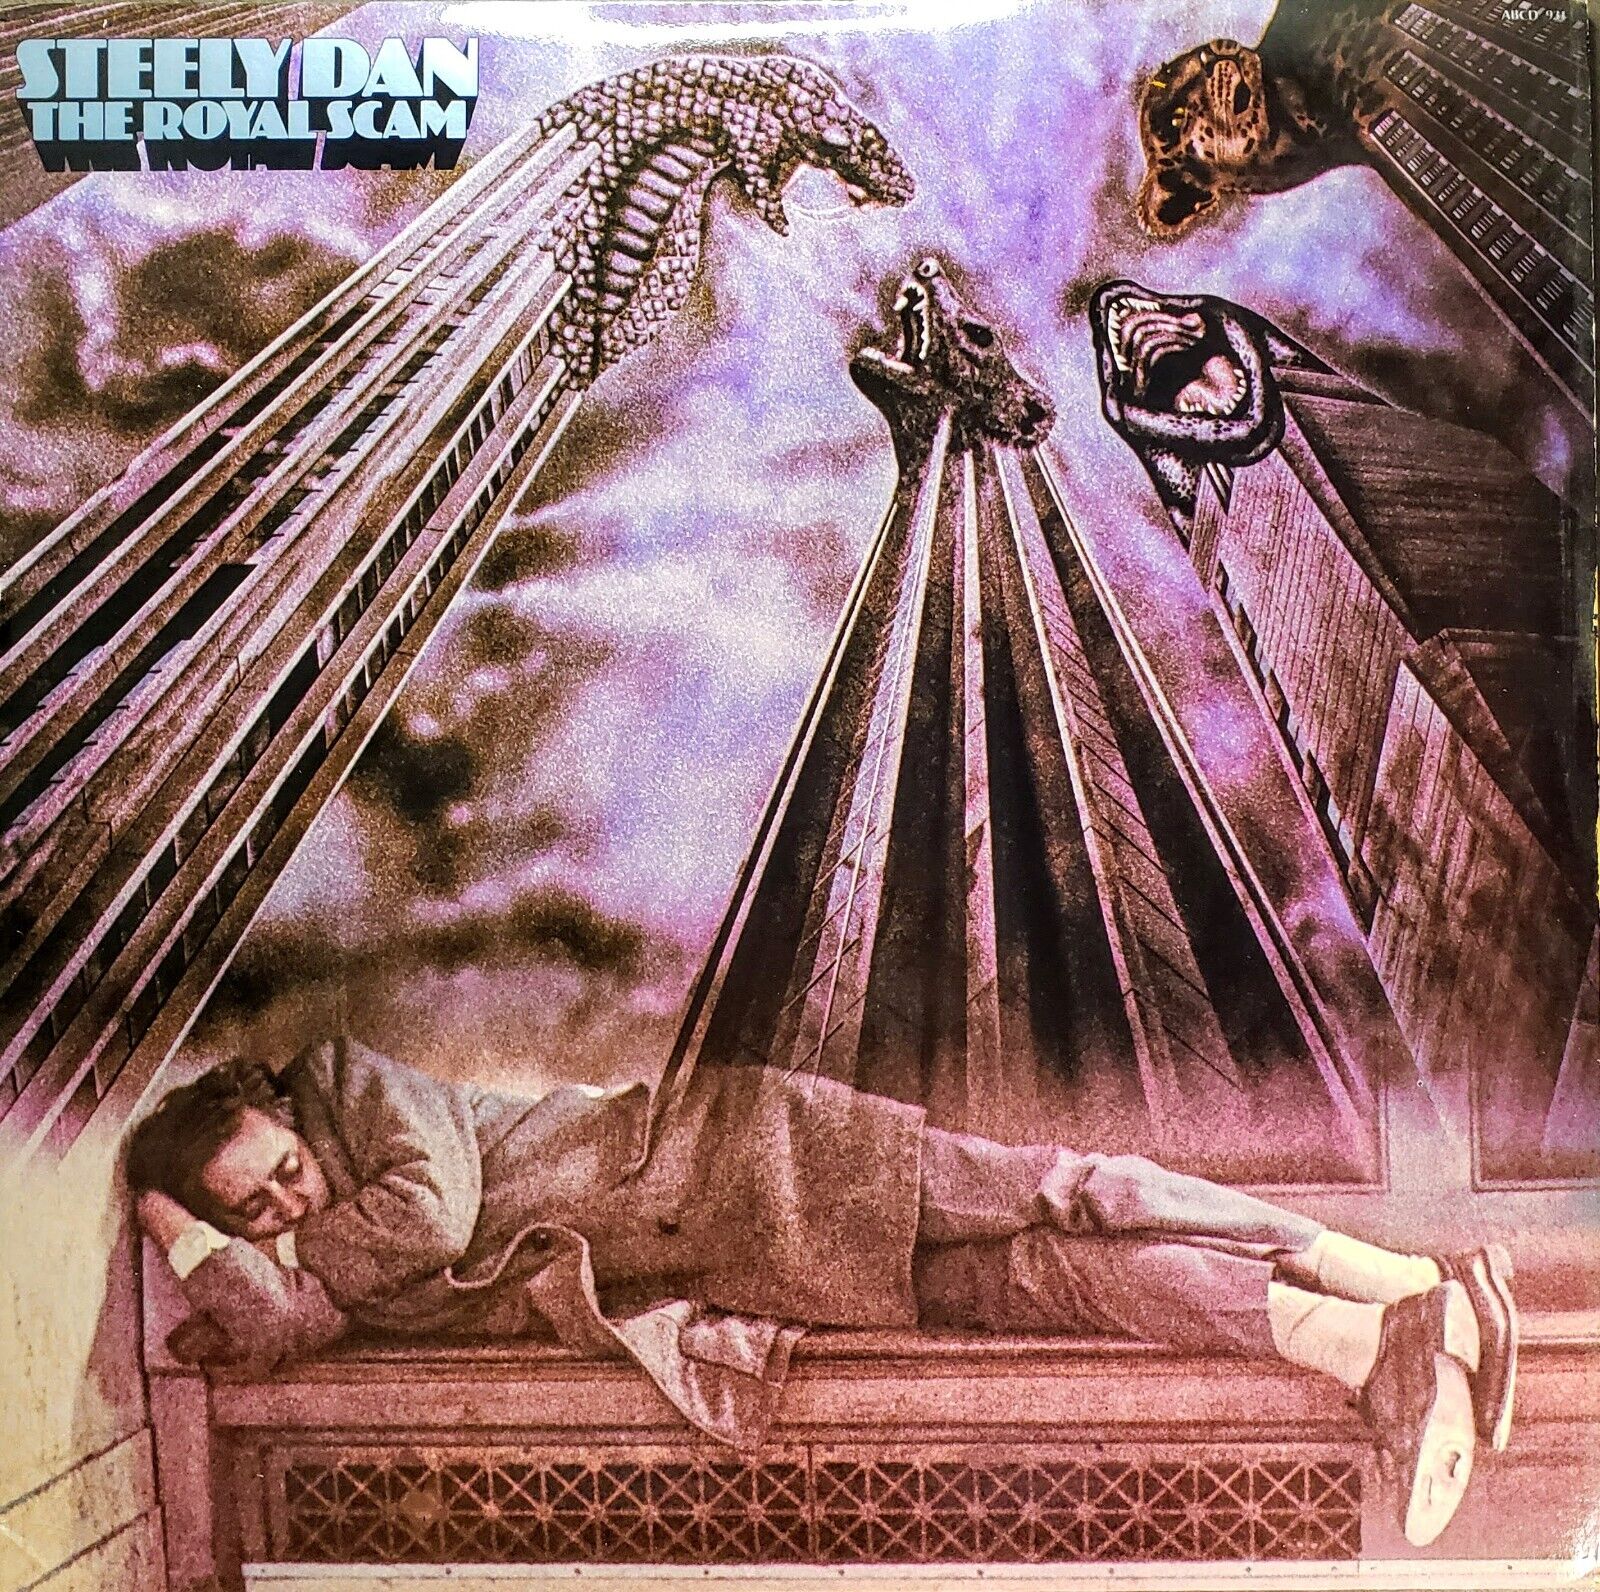 The Royal Scam By, Steely Dan - Very Good Record, Very Good+ Sleeve ABCD 931